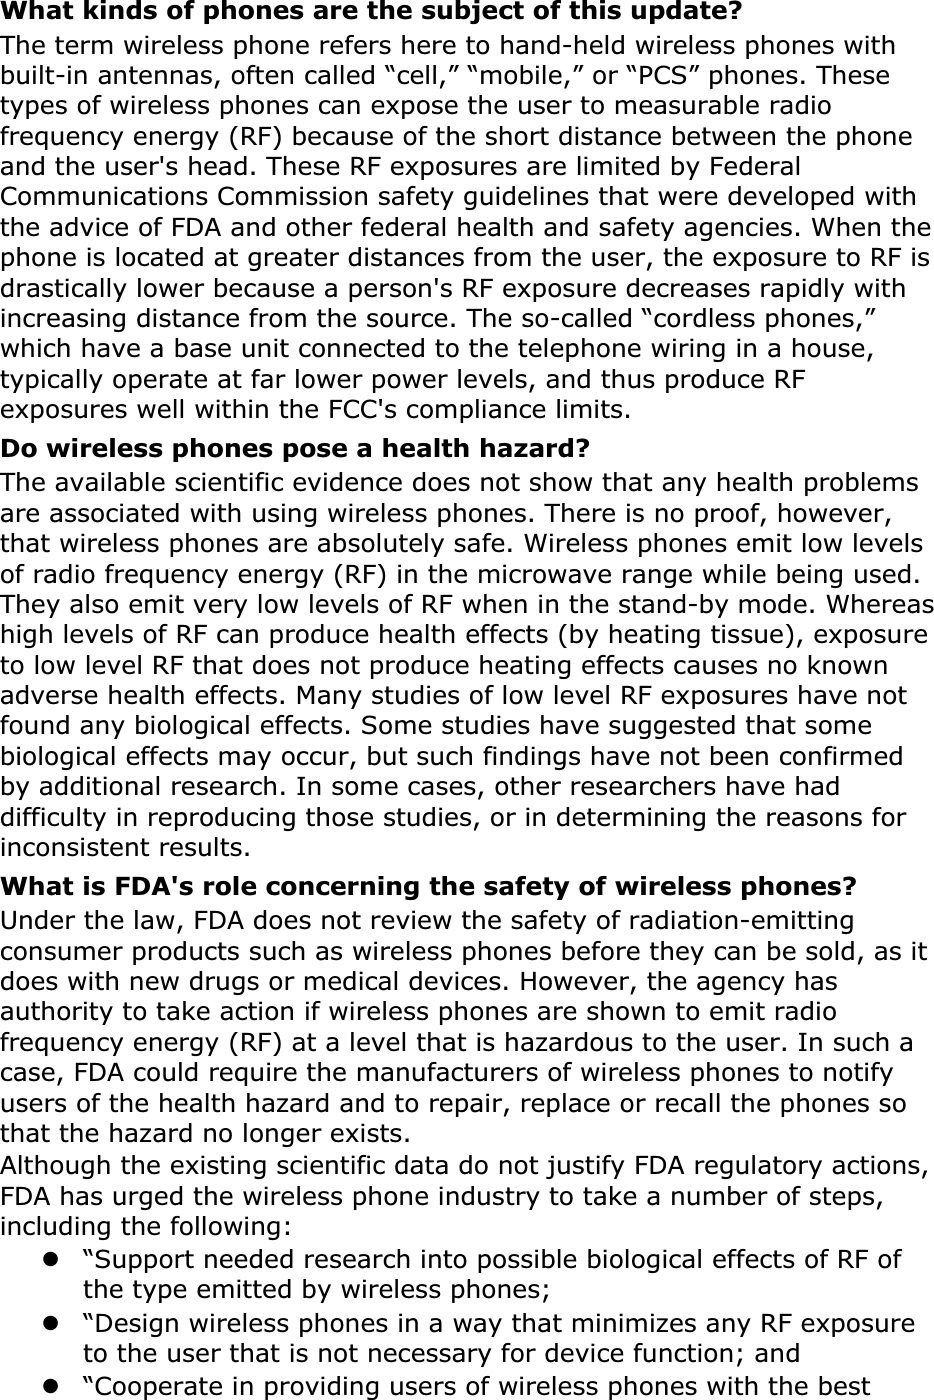 What kinds of phones are the subject of this update?The term wireless phone refers here to hand-held wireless phones with built-in antennas, often called “cell,” “mobile,” or “PCS” phones. These types of wireless phones can expose the user to measurable radio frequency energy (RF) because of the short distance between the phone and the user&apos;s head. These RF exposures are limited by Federal Communications Commission safety guidelines that were developed with the advice of FDA and other federal health and safety agencies. When the phone is located at greater distances from the user, the exposure to RF is drastically lower because a person&apos;s RF exposure decreases rapidly with increasing distance from the source. The so-called “cordless phones,” which have a base unit connected to the telephone wiring in a house, typically operate at far lower power levels, and thus produce RF exposures well within the FCC&apos;s compliance limits.Do wireless phones pose a health hazard?The available scientific evidence does not show that any health problems are associated with using wireless phones. There is no proof, however, that wireless phones are absolutely safe. Wireless phones emit low levels of radio frequency energy (RF) in the microwave range while being used. They also emit very low levels of RF when in the stand-by mode. Whereas high levels of RF can produce health effects (by heating tissue), exposure to low level RF that does not produce heating effects causes no known adverse health effects. Many studies of low level RF exposures have not found any biological effects. Some studies have suggested that some biological effects may occur, but such findings have not been confirmed by additional research. In some cases, other researchers have had difficulty in reproducing those studies, or in determining the reasons for inconsistent results.What is FDA&apos;s role concerning the safety of wireless phones?Under the law, FDA does not review the safety of radiation-emitting consumer products such as wireless phones before they can be sold, as it does with new drugs or medical devices. However, the agency has authority to take action if wireless phones are shown to emit radio frequency energy (RF) at a level that is hazardous to the user. In such a case, FDA could require the manufacturers of wireless phones to notify users of the health hazard and to repair, replace or recall the phones so that the hazard no longer exists.Although the existing scientific data do not justify FDA regulatory actions, FDA has urged the wireless phone industry to take a number of steps, including the following:z“Support needed research into possible biological effects of RF of the type emitted by wireless phones;z“Design wireless phones in a way that minimizes any RF exposure to the user that is not necessary for device function; andz“Cooperate in providing users of wireless phones with the best 